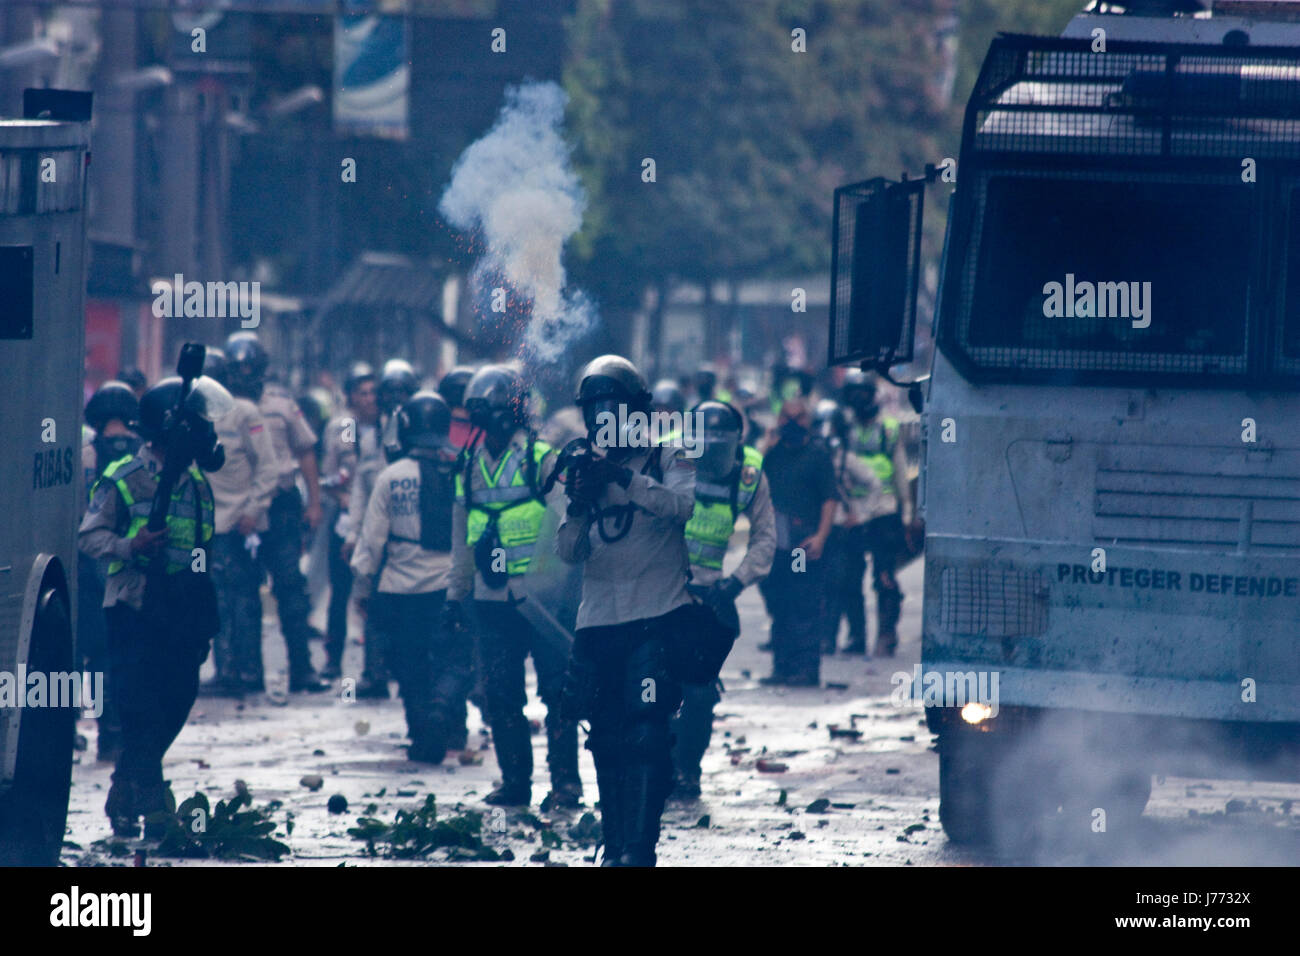 Police officers disperse a protest in Caracas. Stock Photo